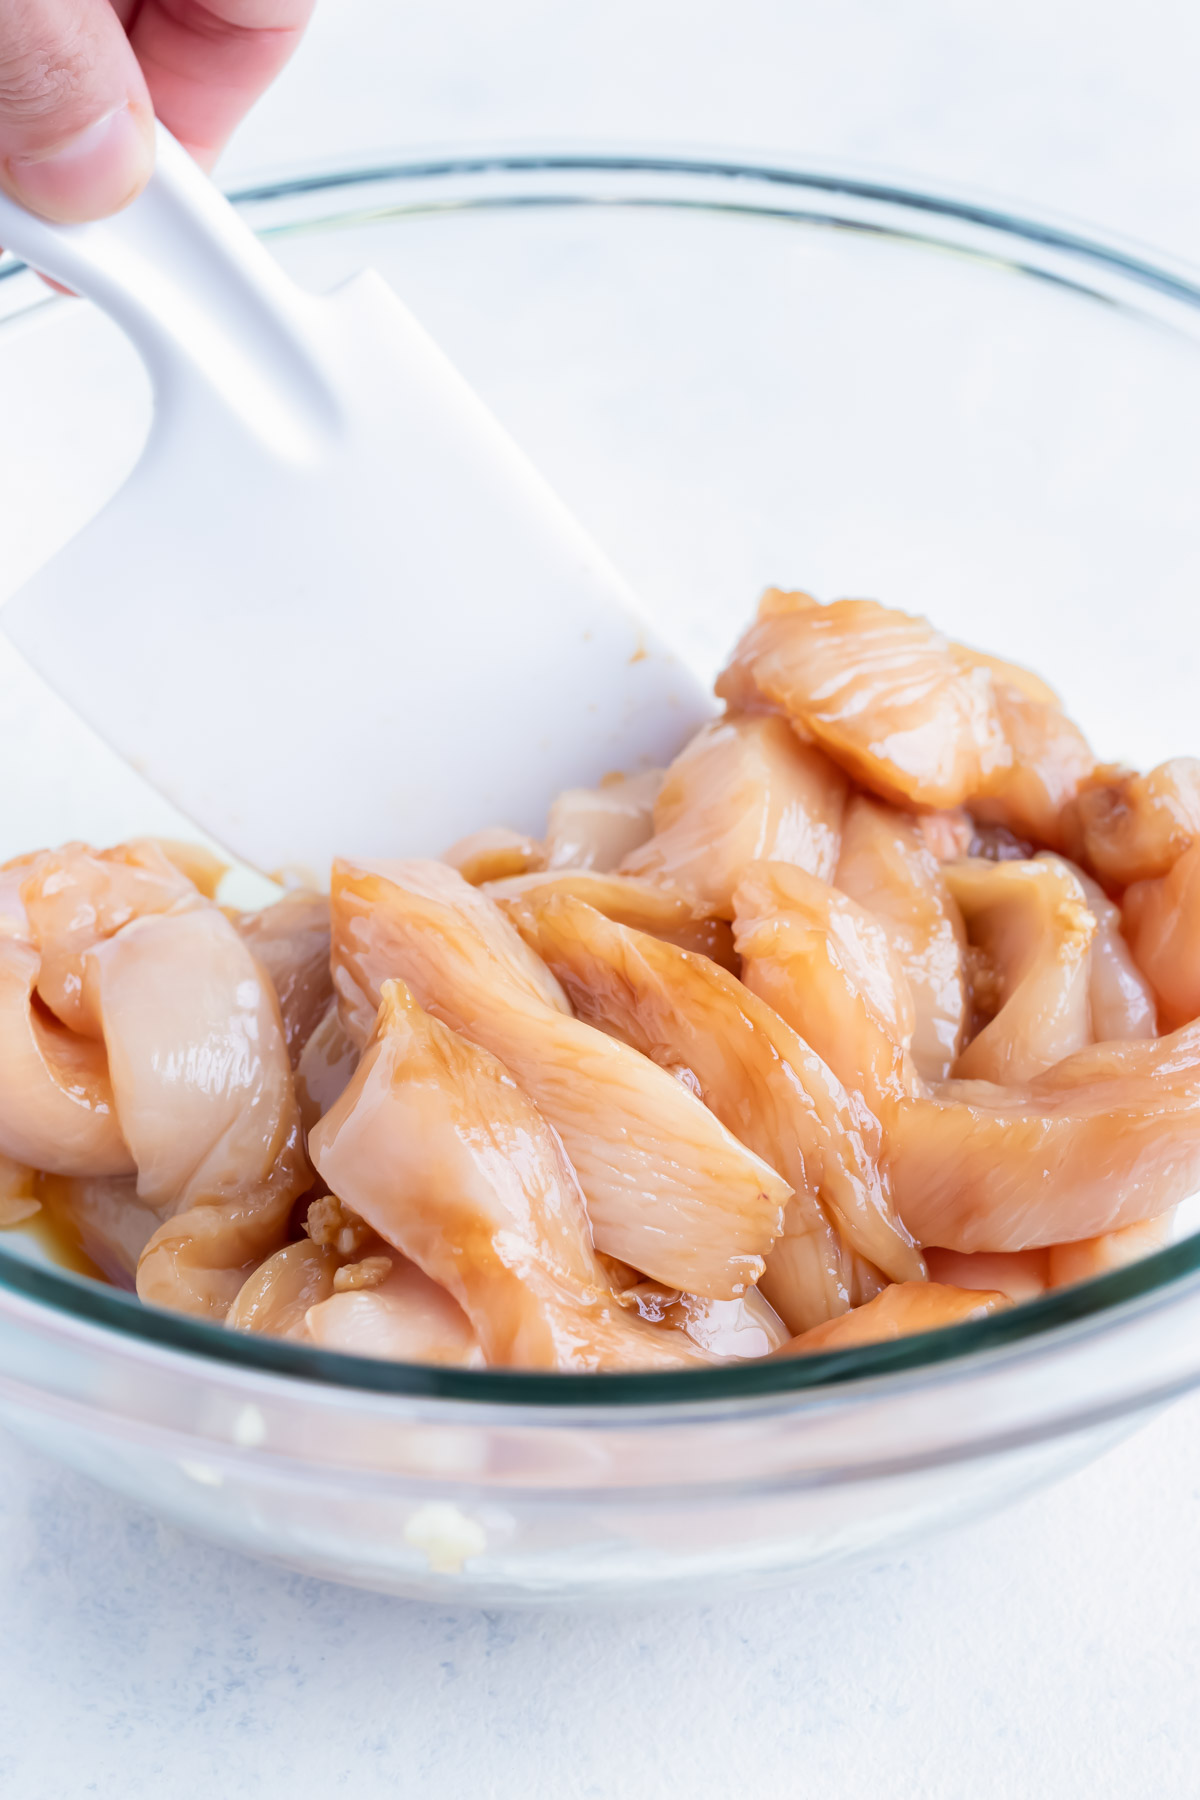 Sliced raw chicken is marinated in a glass bowl before cooking.